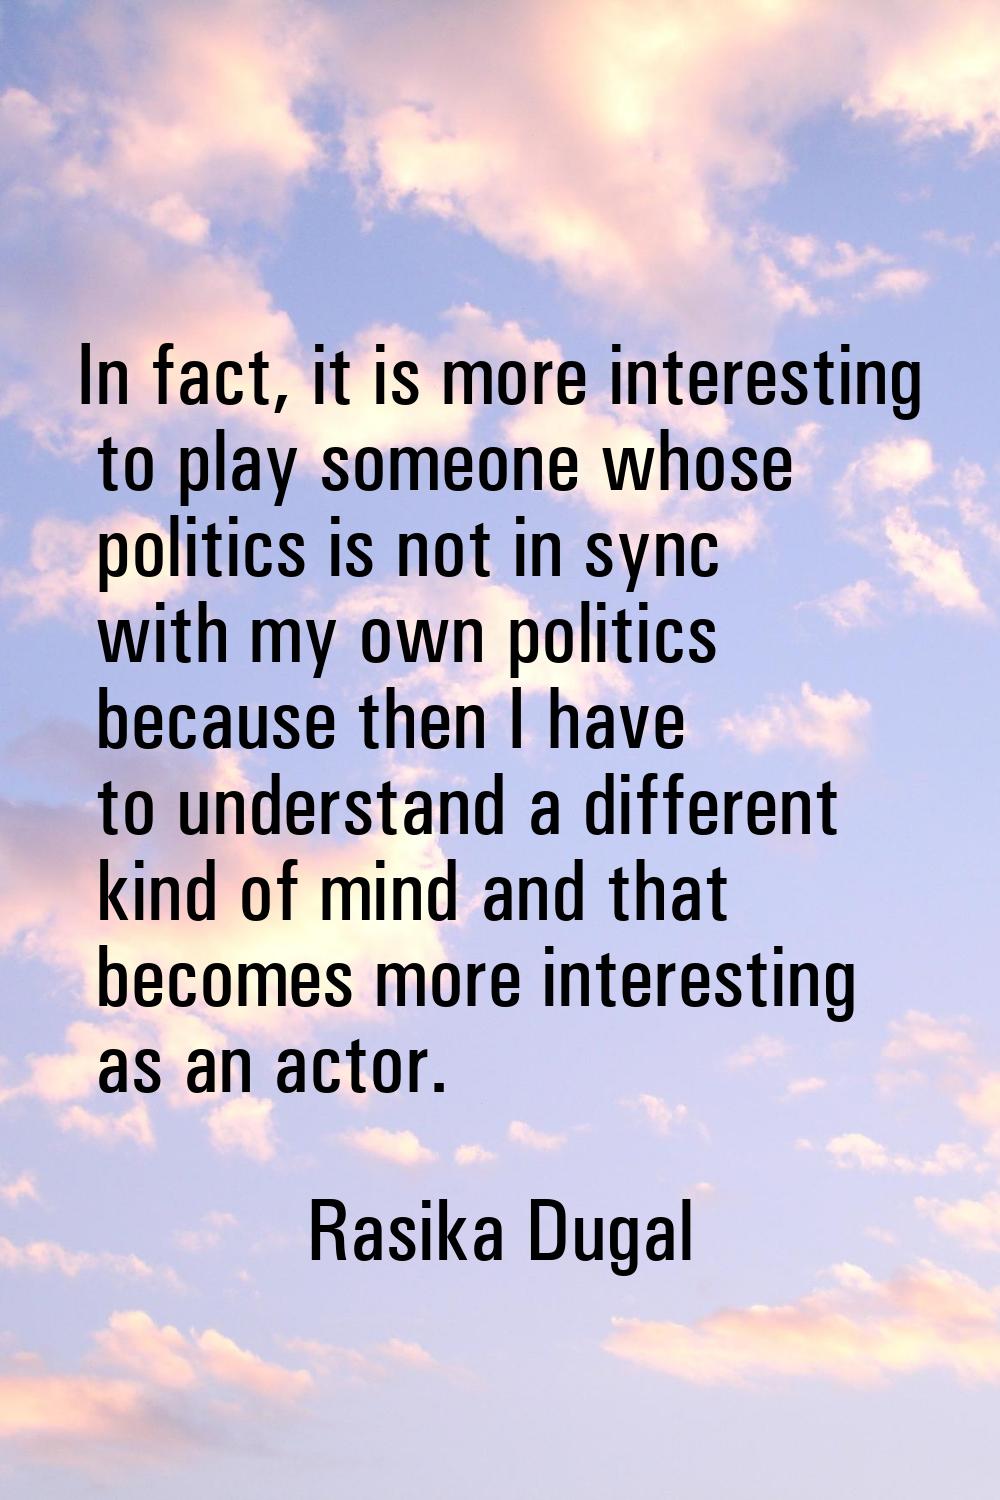 In fact, it is more interesting to play someone whose politics is not in sync with my own politics 